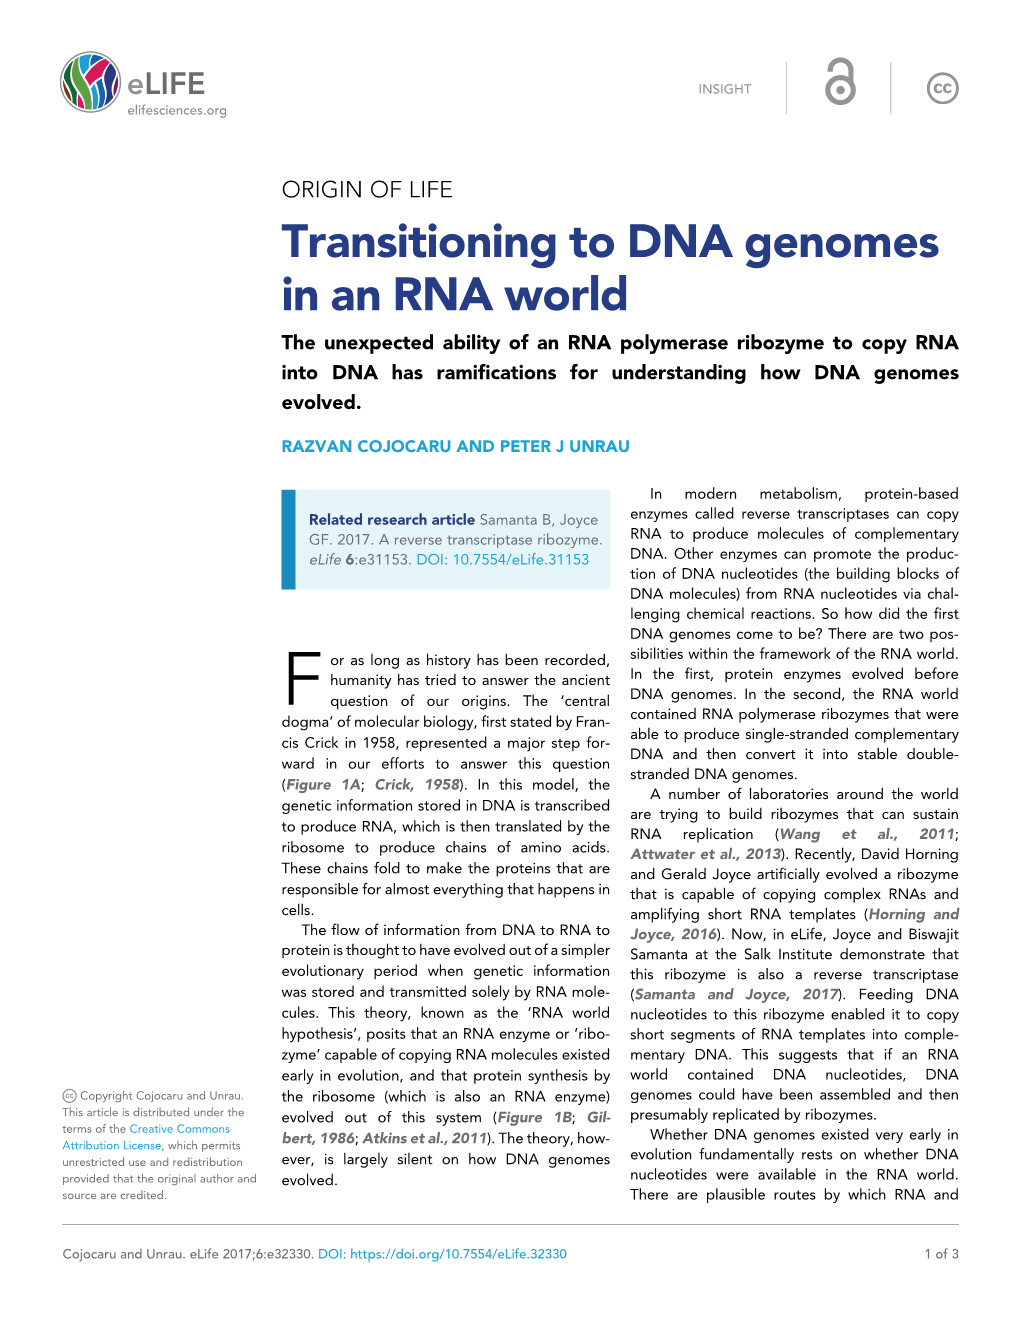 Transitioning to DNA Genomes in an RNA World